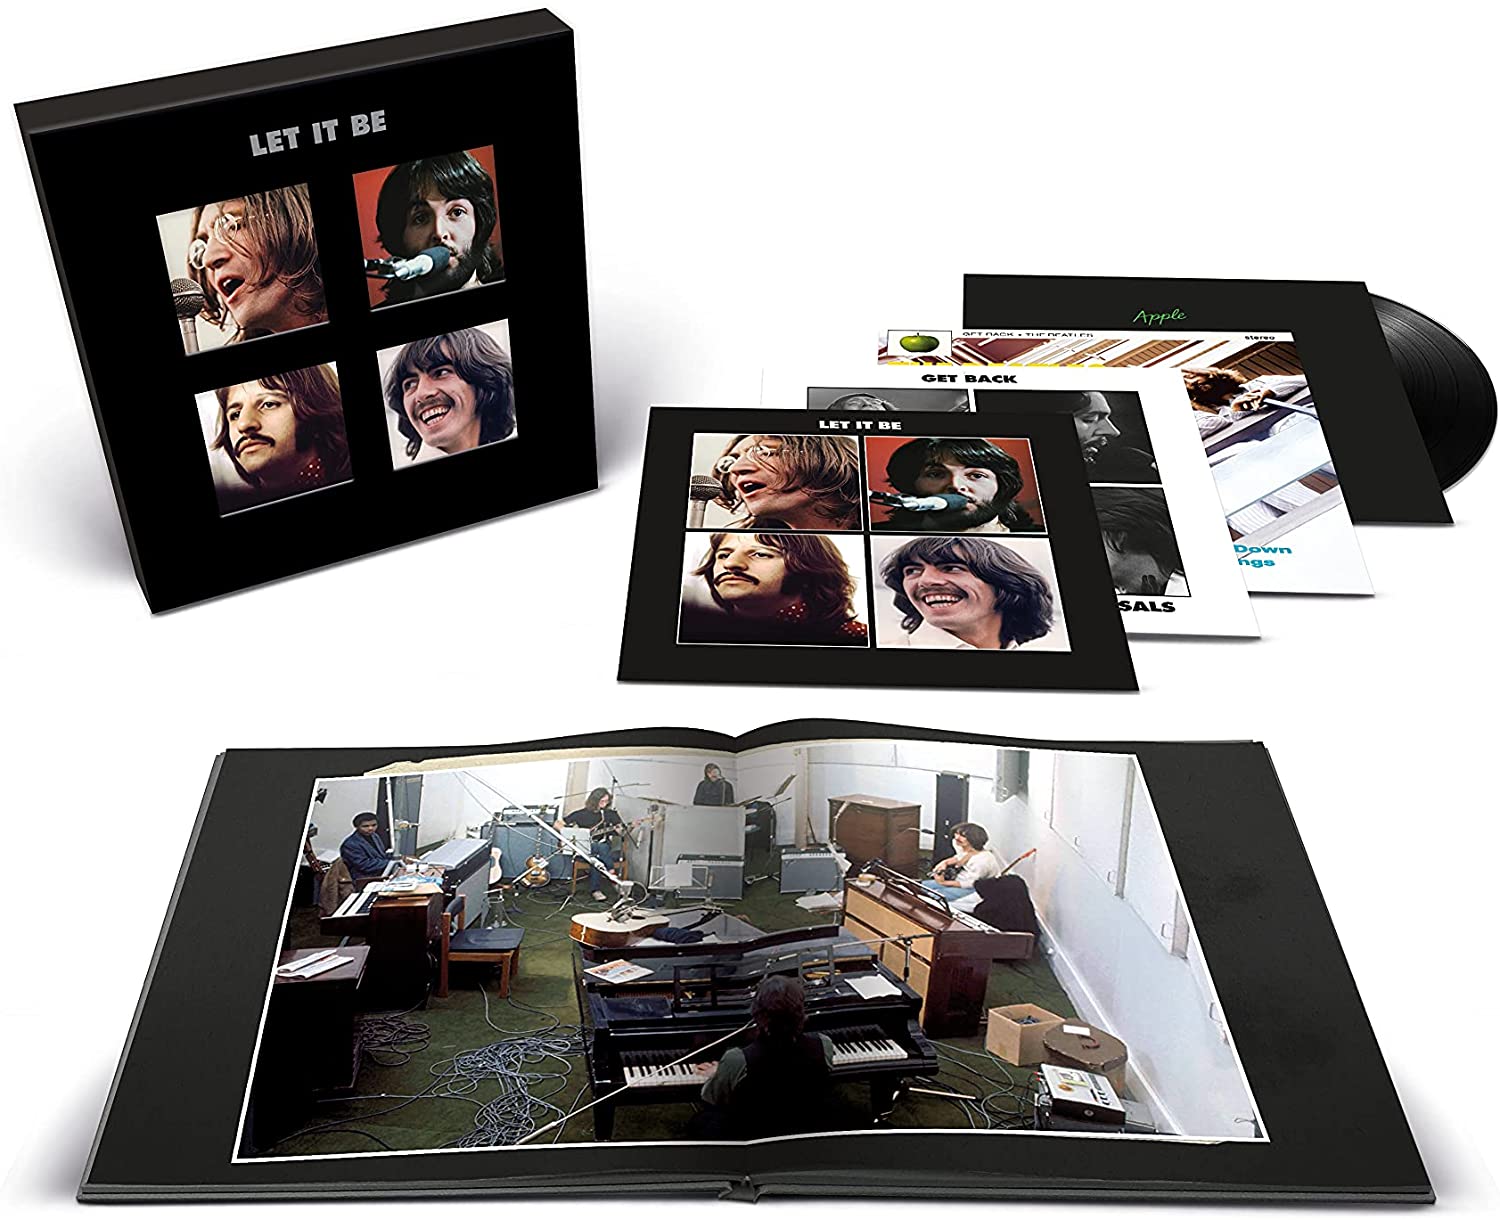 BEATLES - Let It Be - 50Th Anniversary limited Superdeluxe vinyl box set